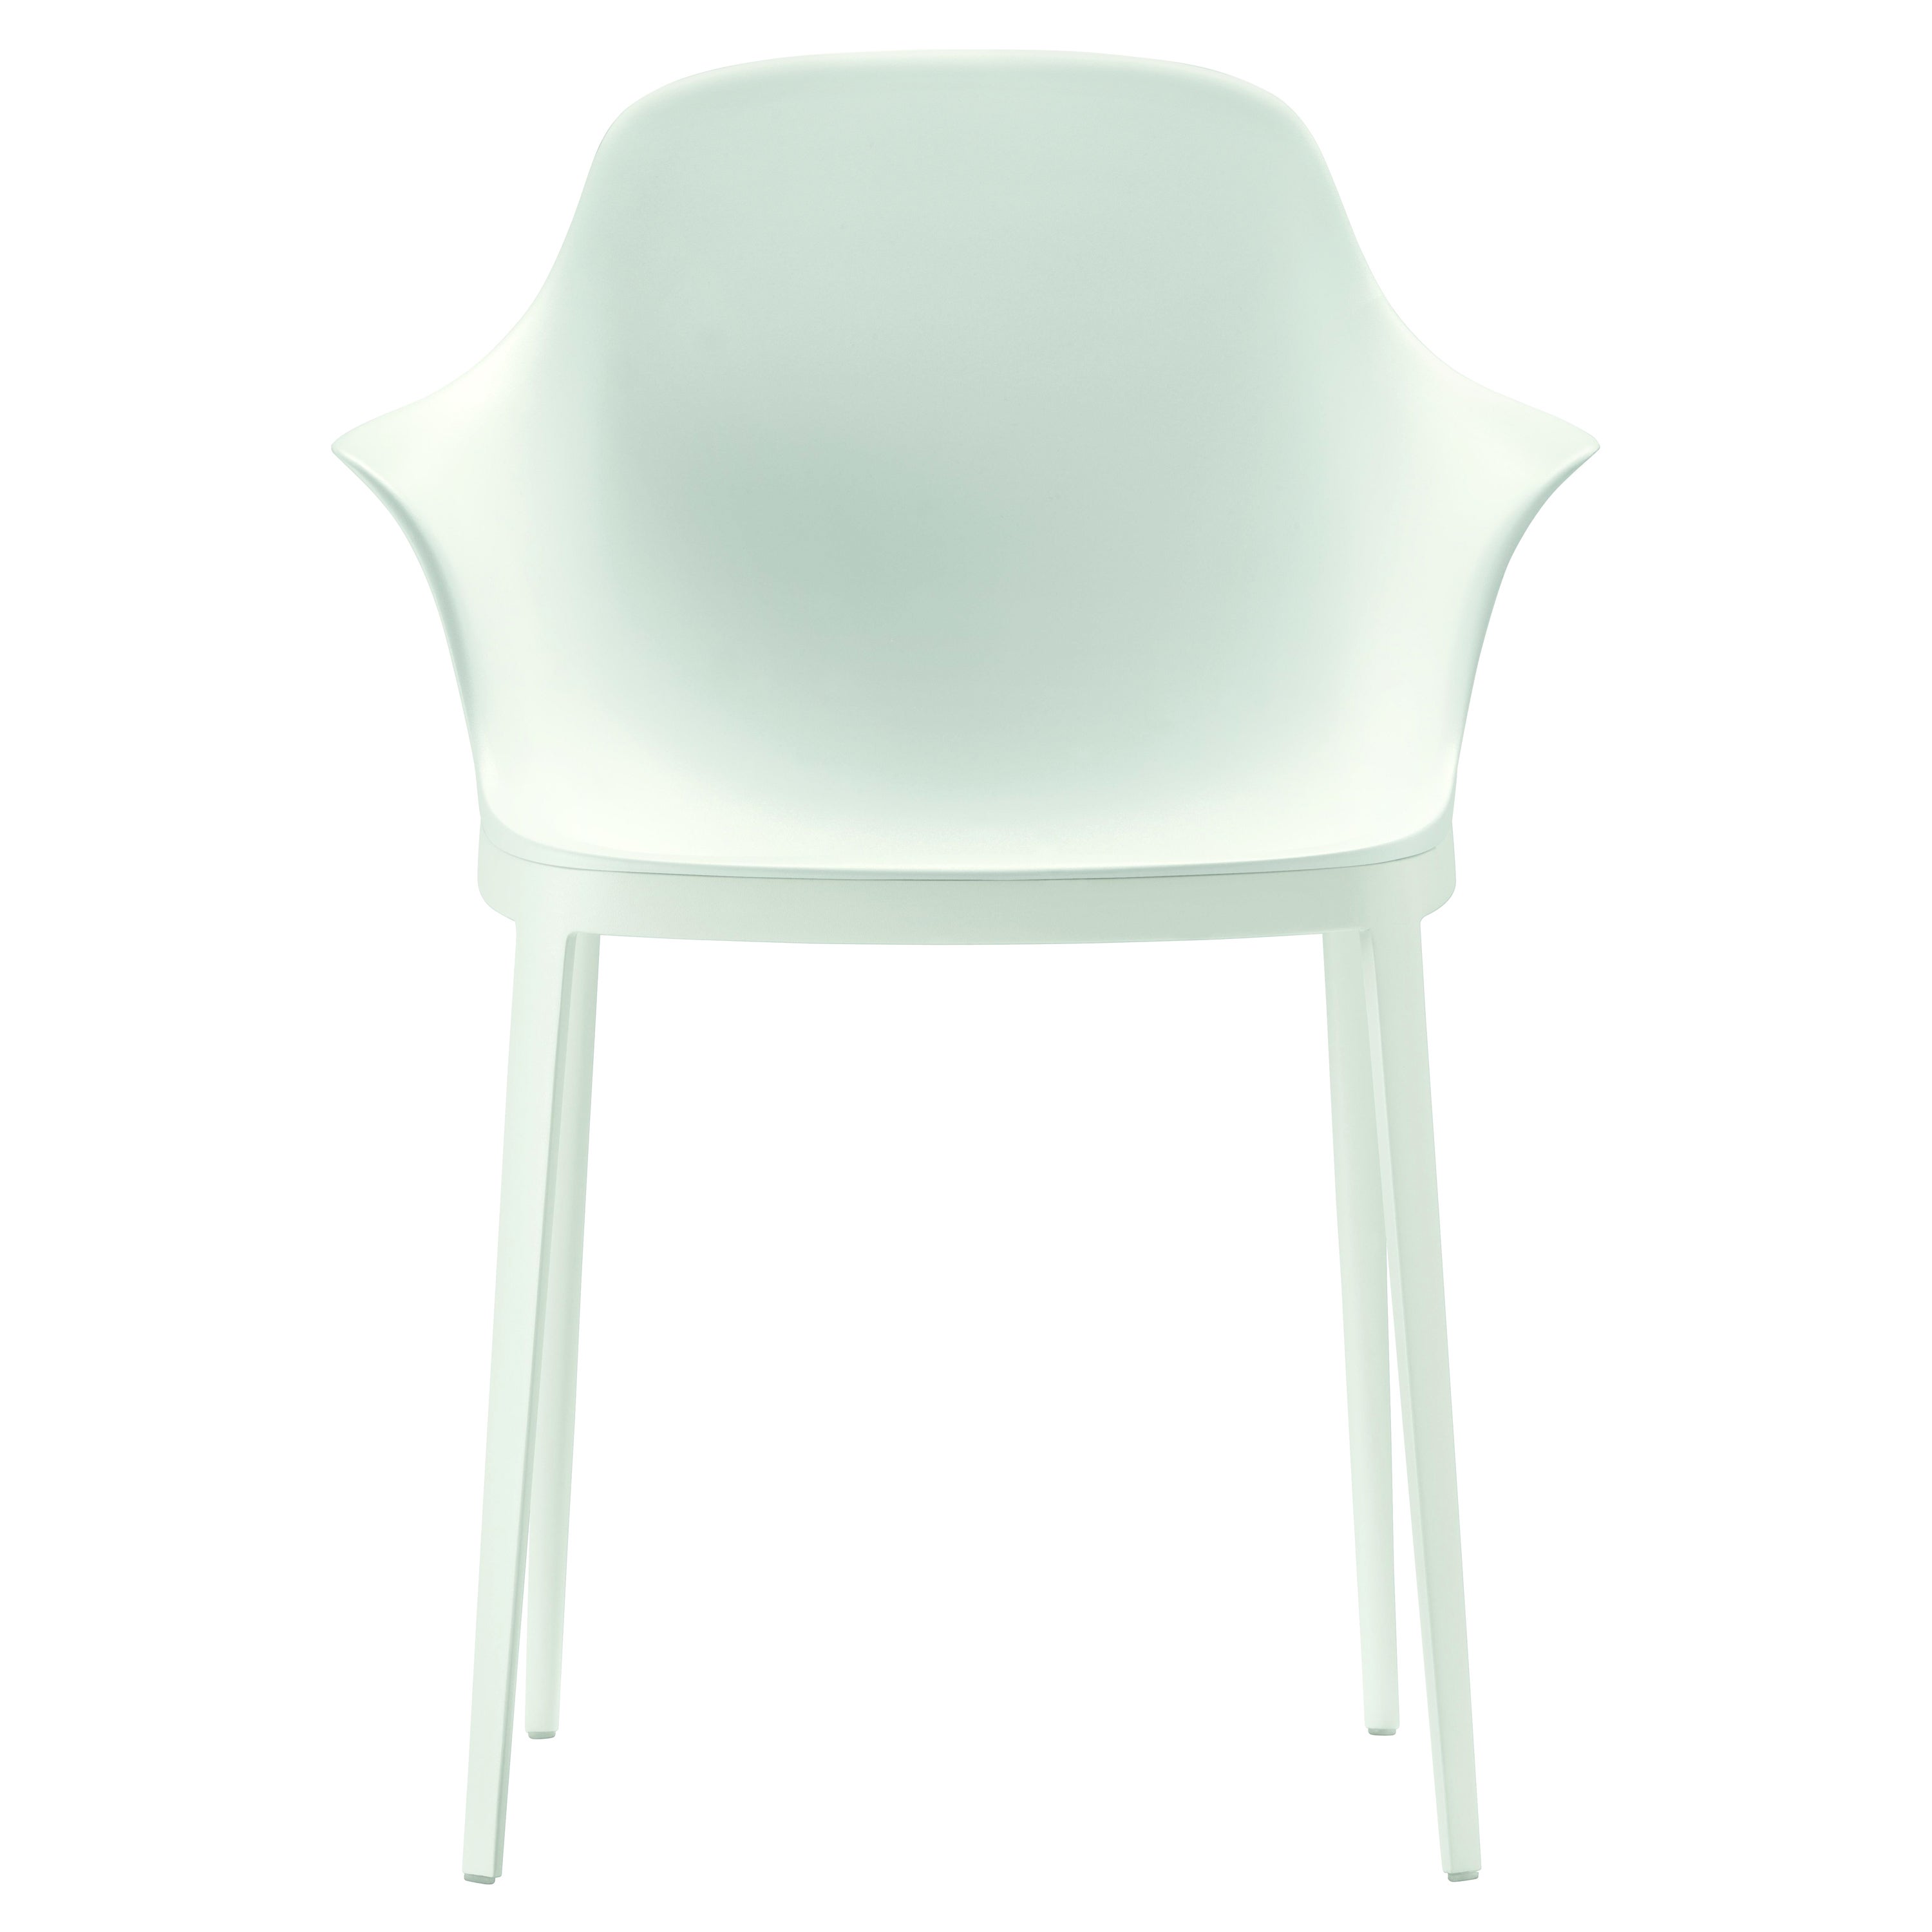 Alias 073 Elle Armchair in White Lacquered Aluminum Frame by Eugeni Quitllet For Sale